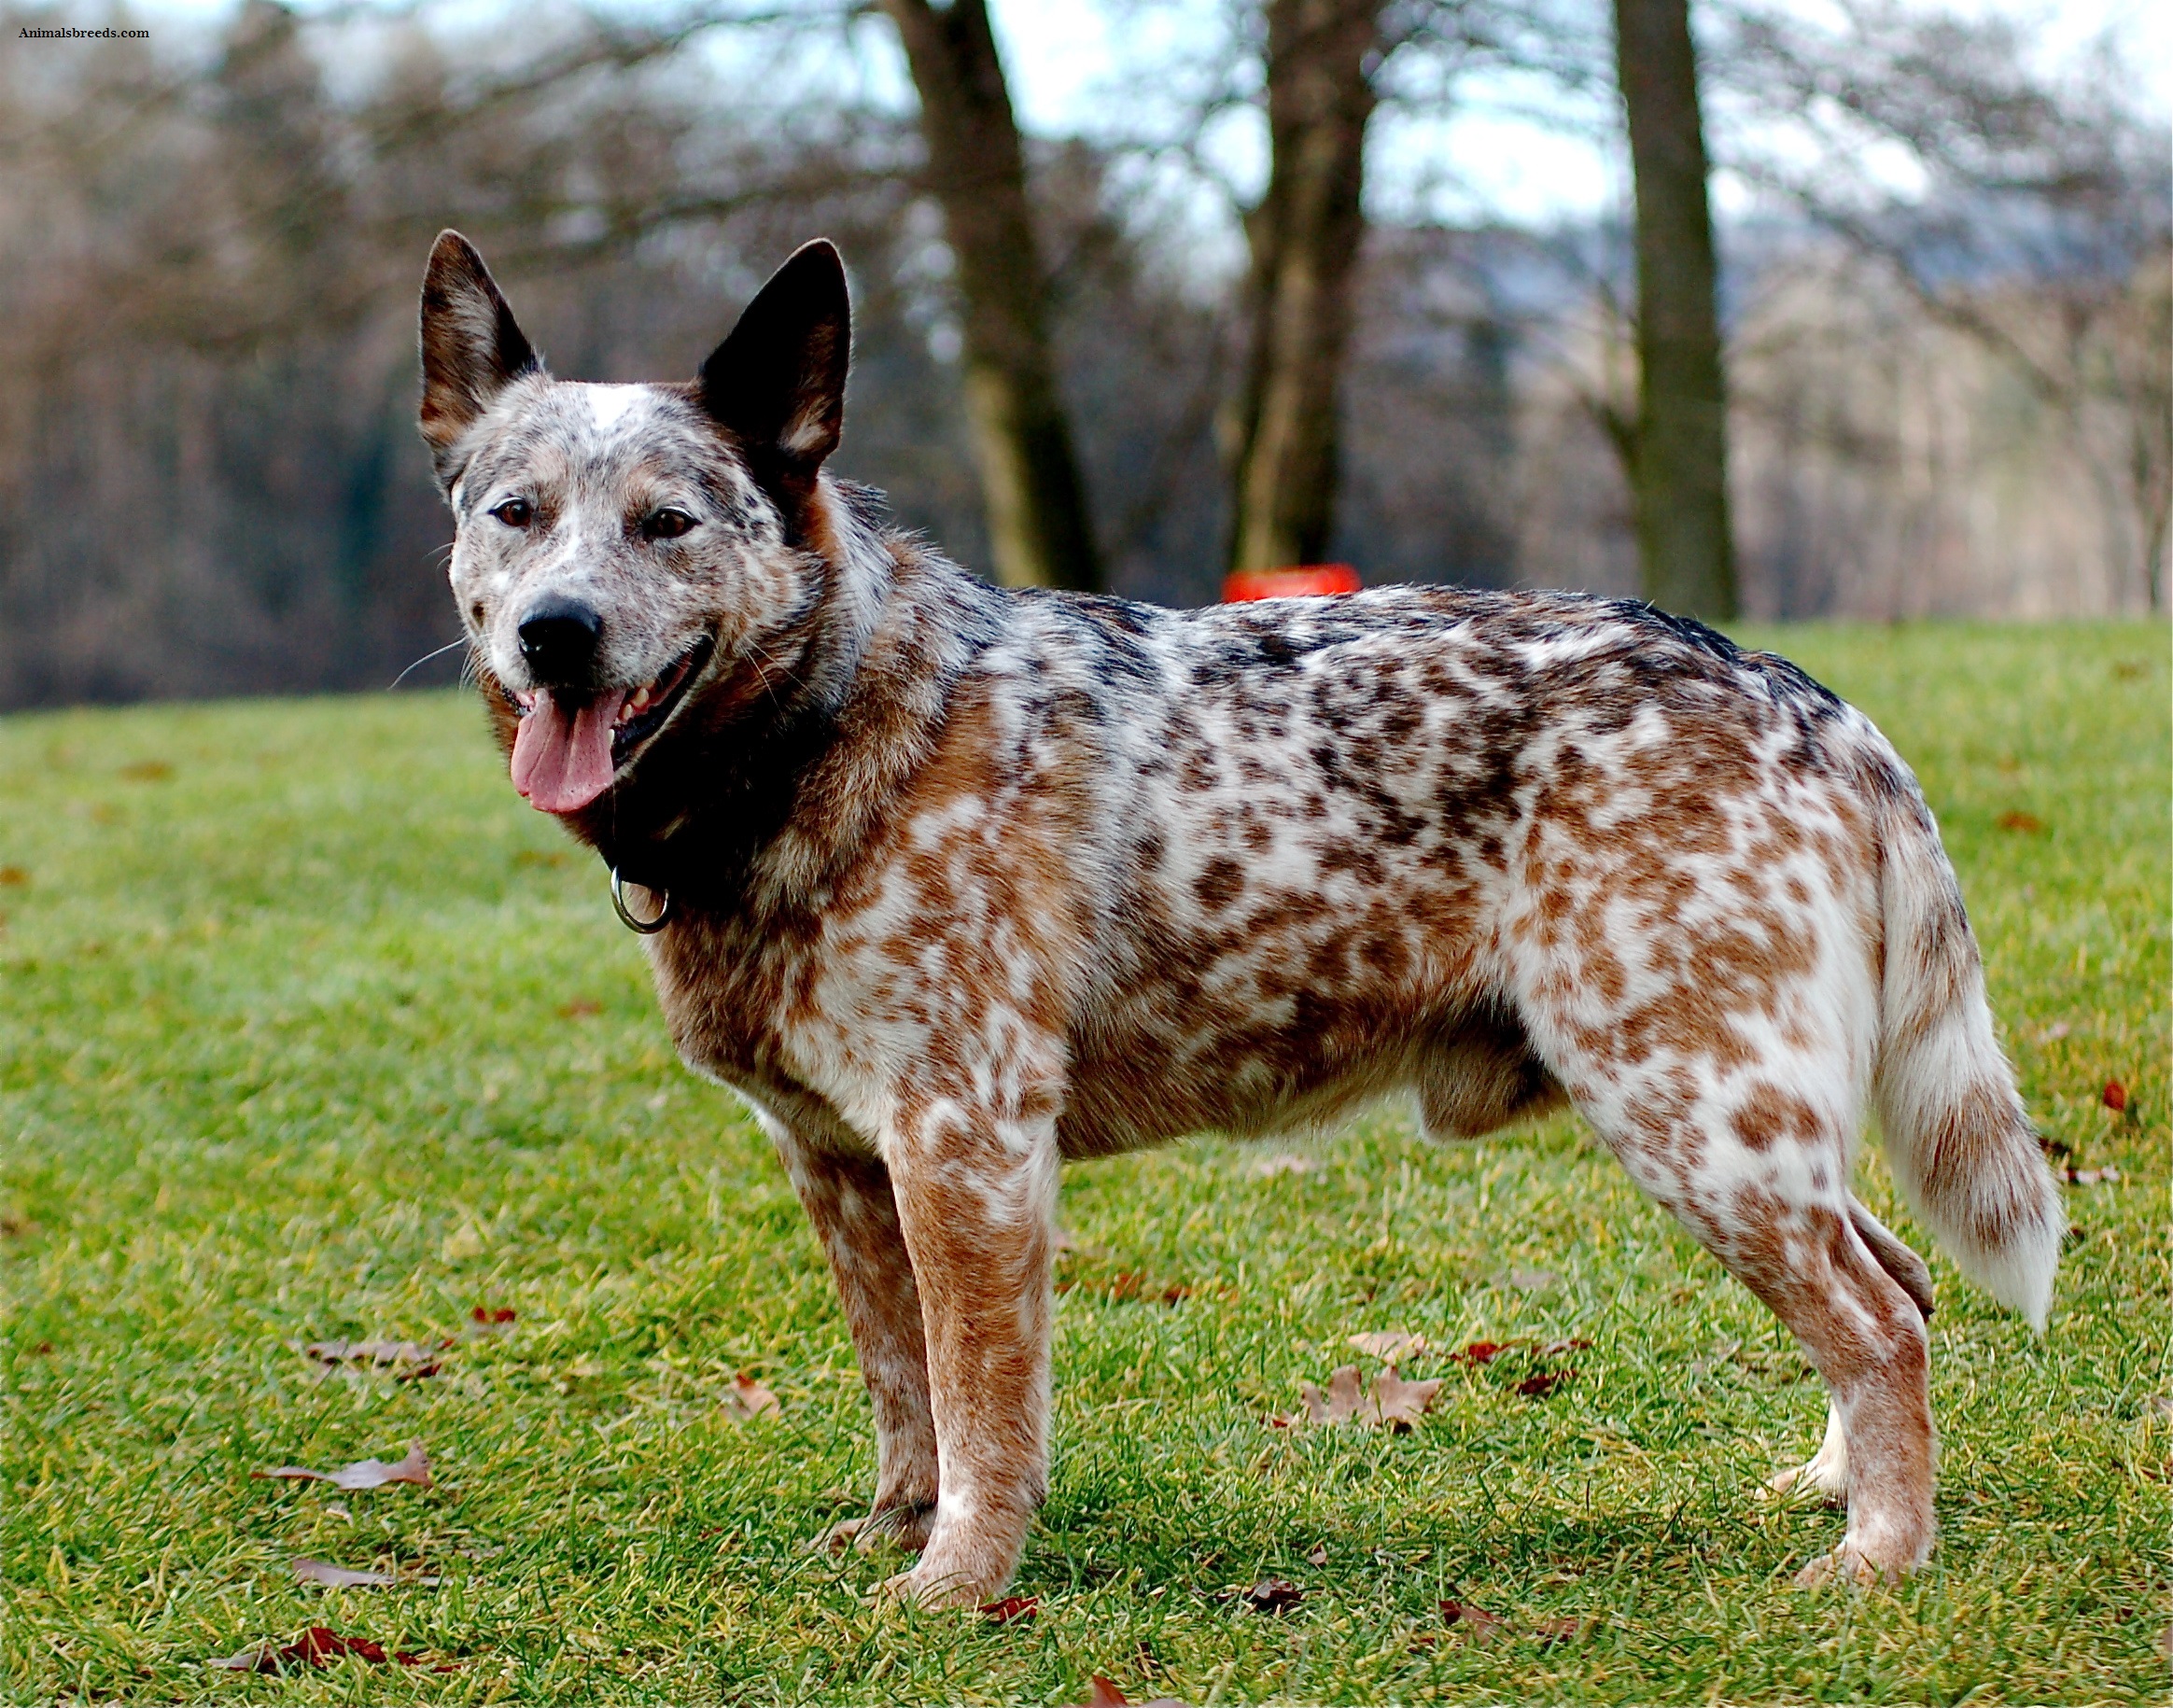 Australian Cattle Dog Wallpapers High Quality | Download Free